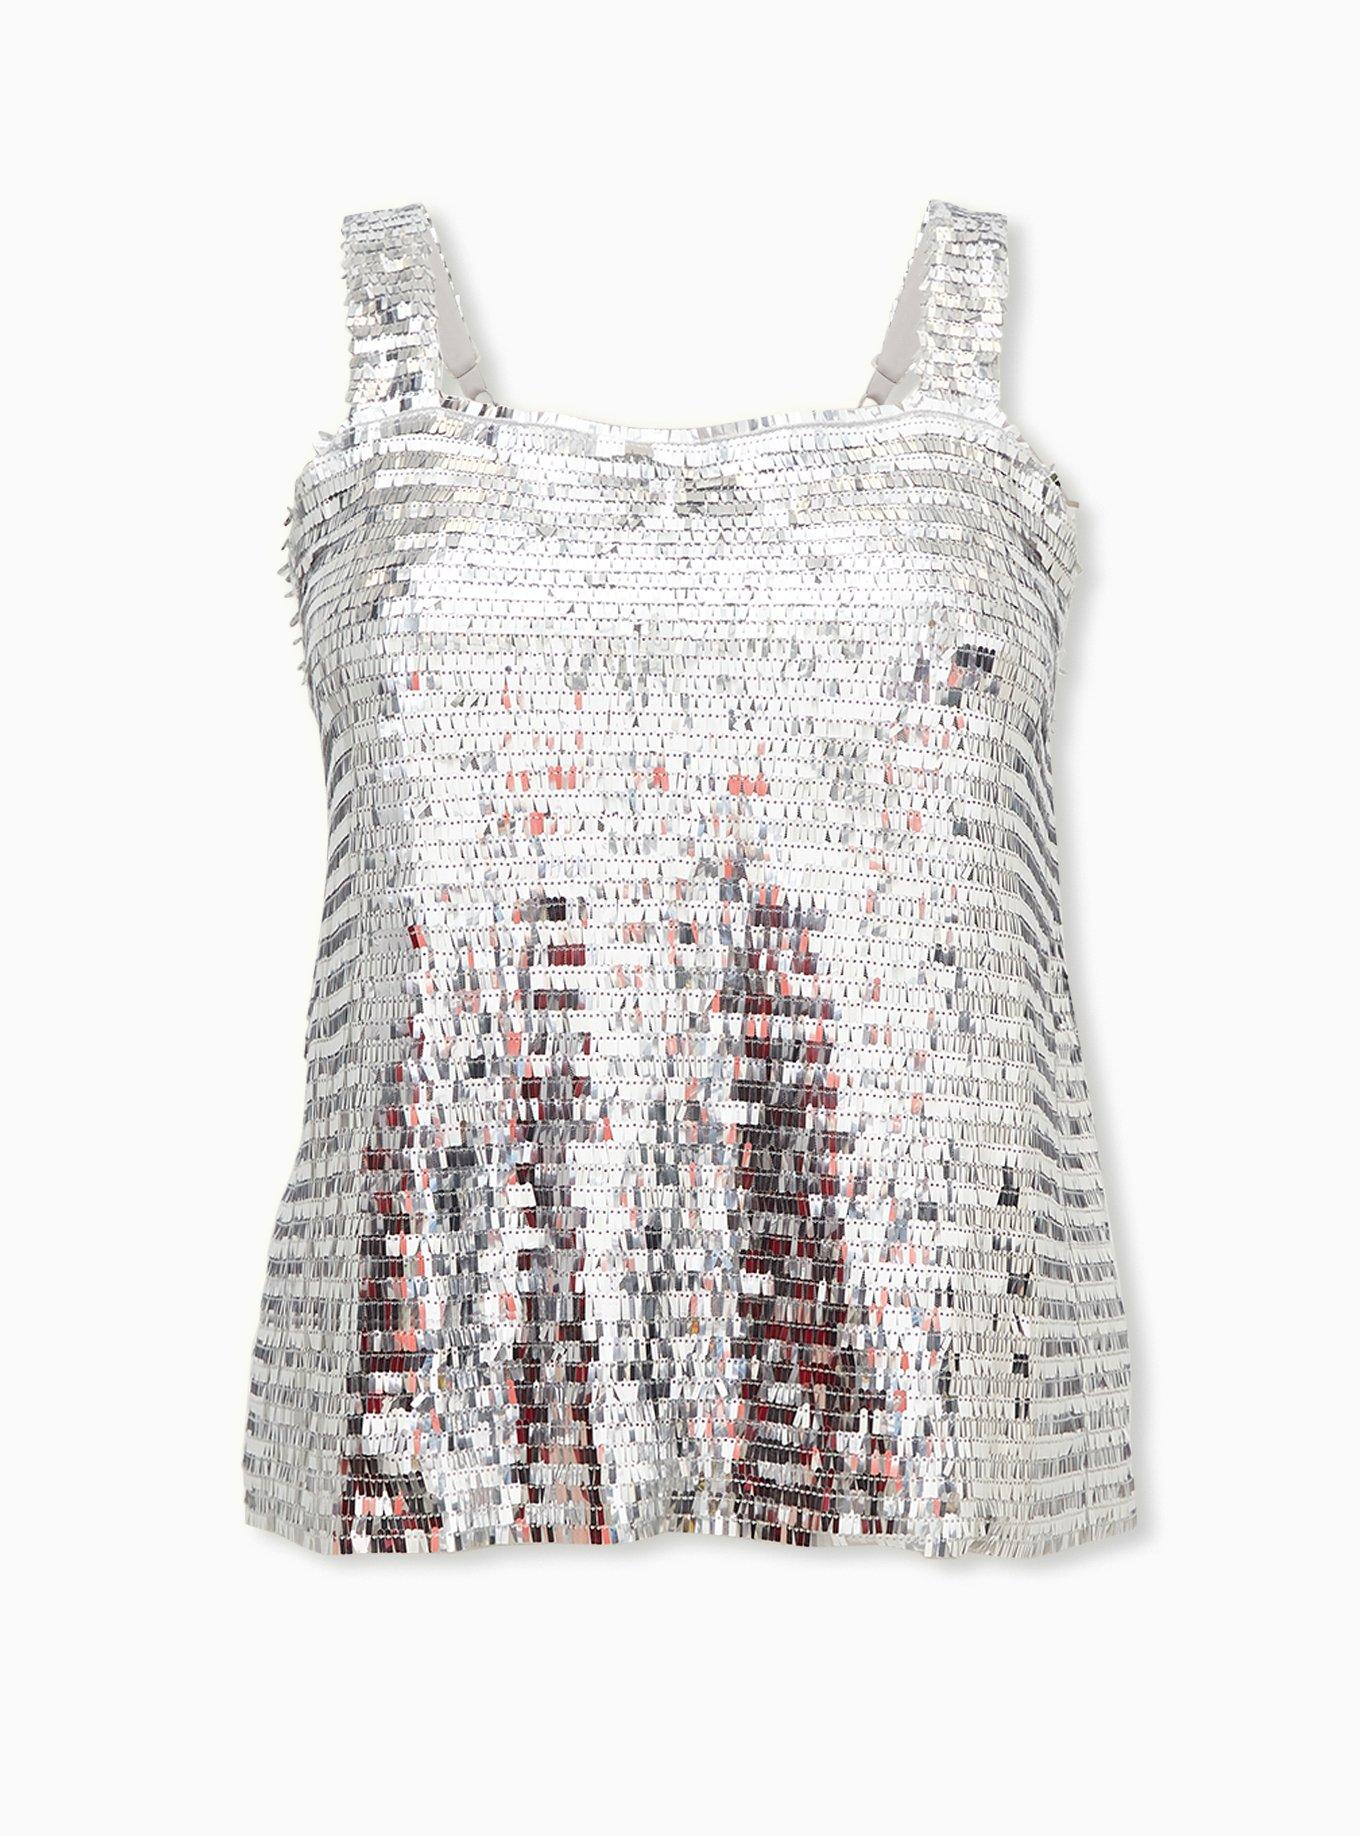 Sequined Tank Top - Silver-colored - Ladies